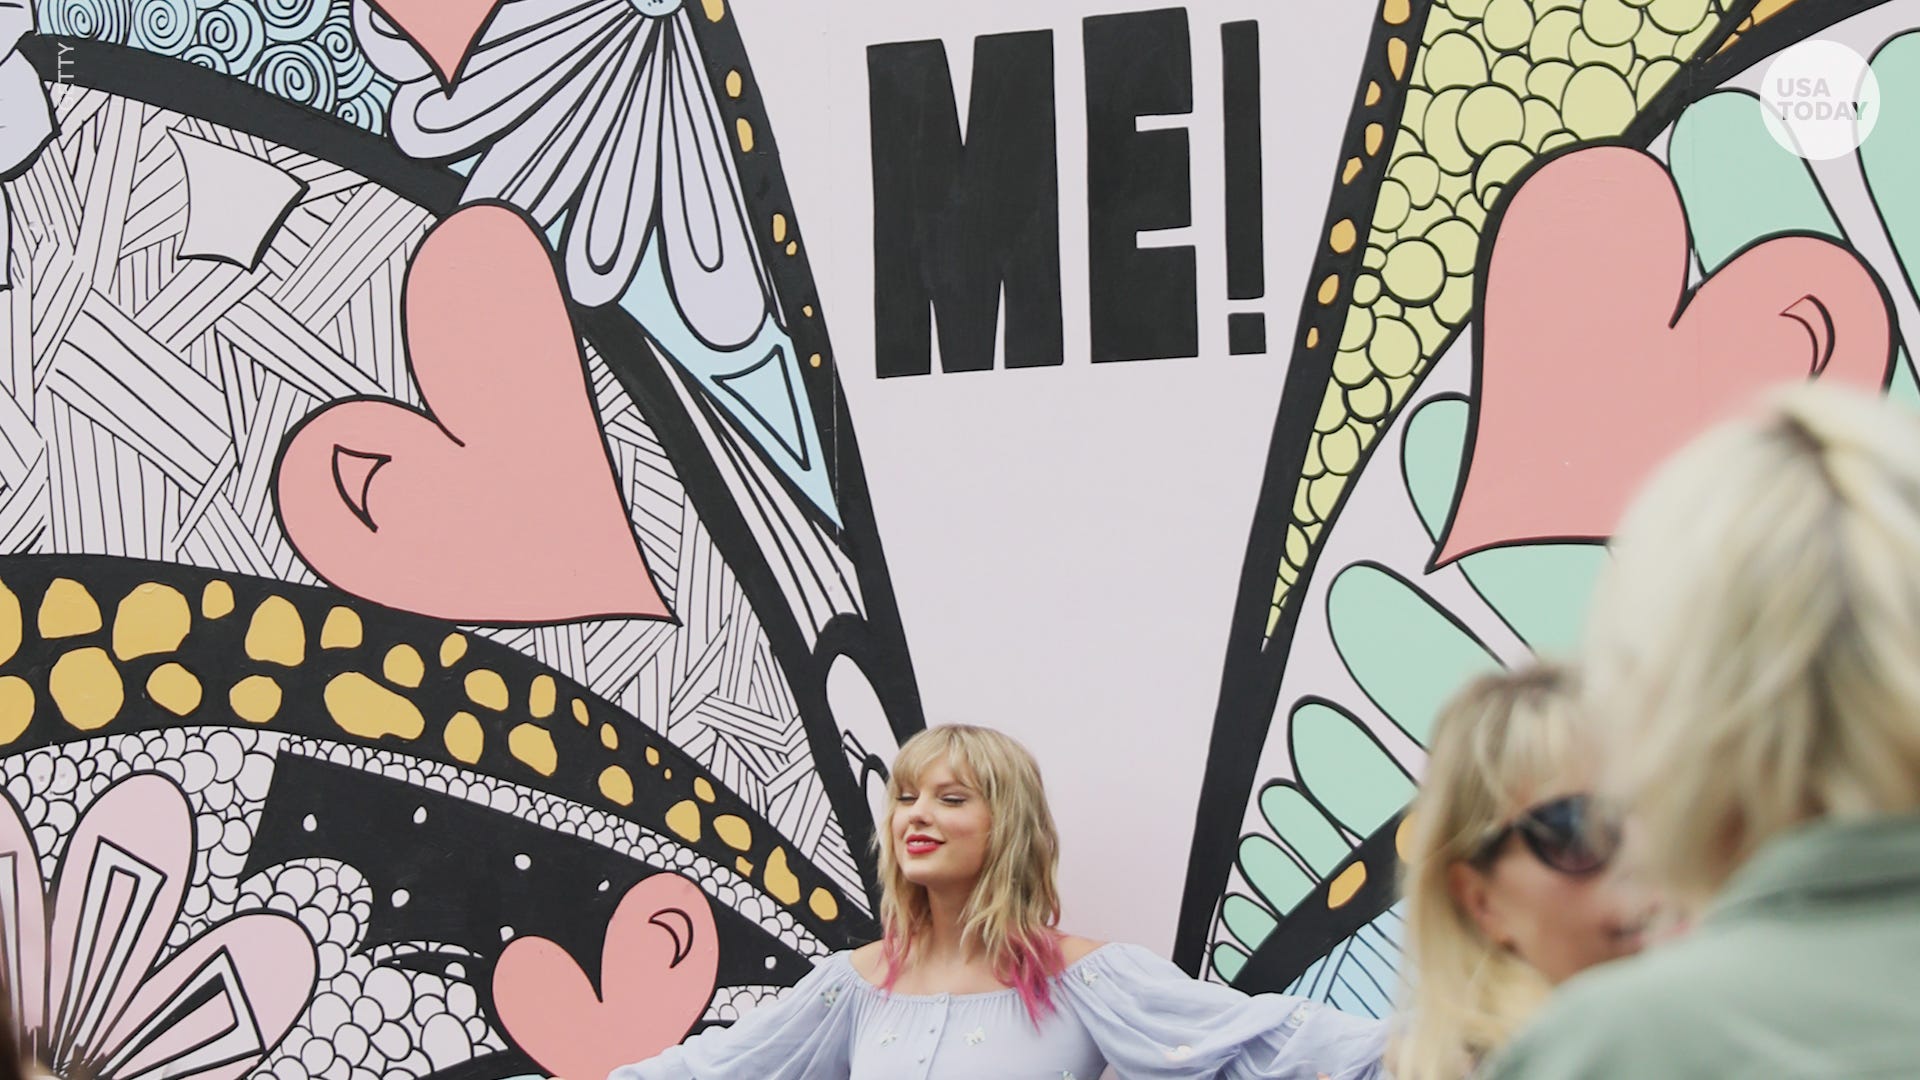 Taylor Swift Wants You To Feel Good With New Song Me